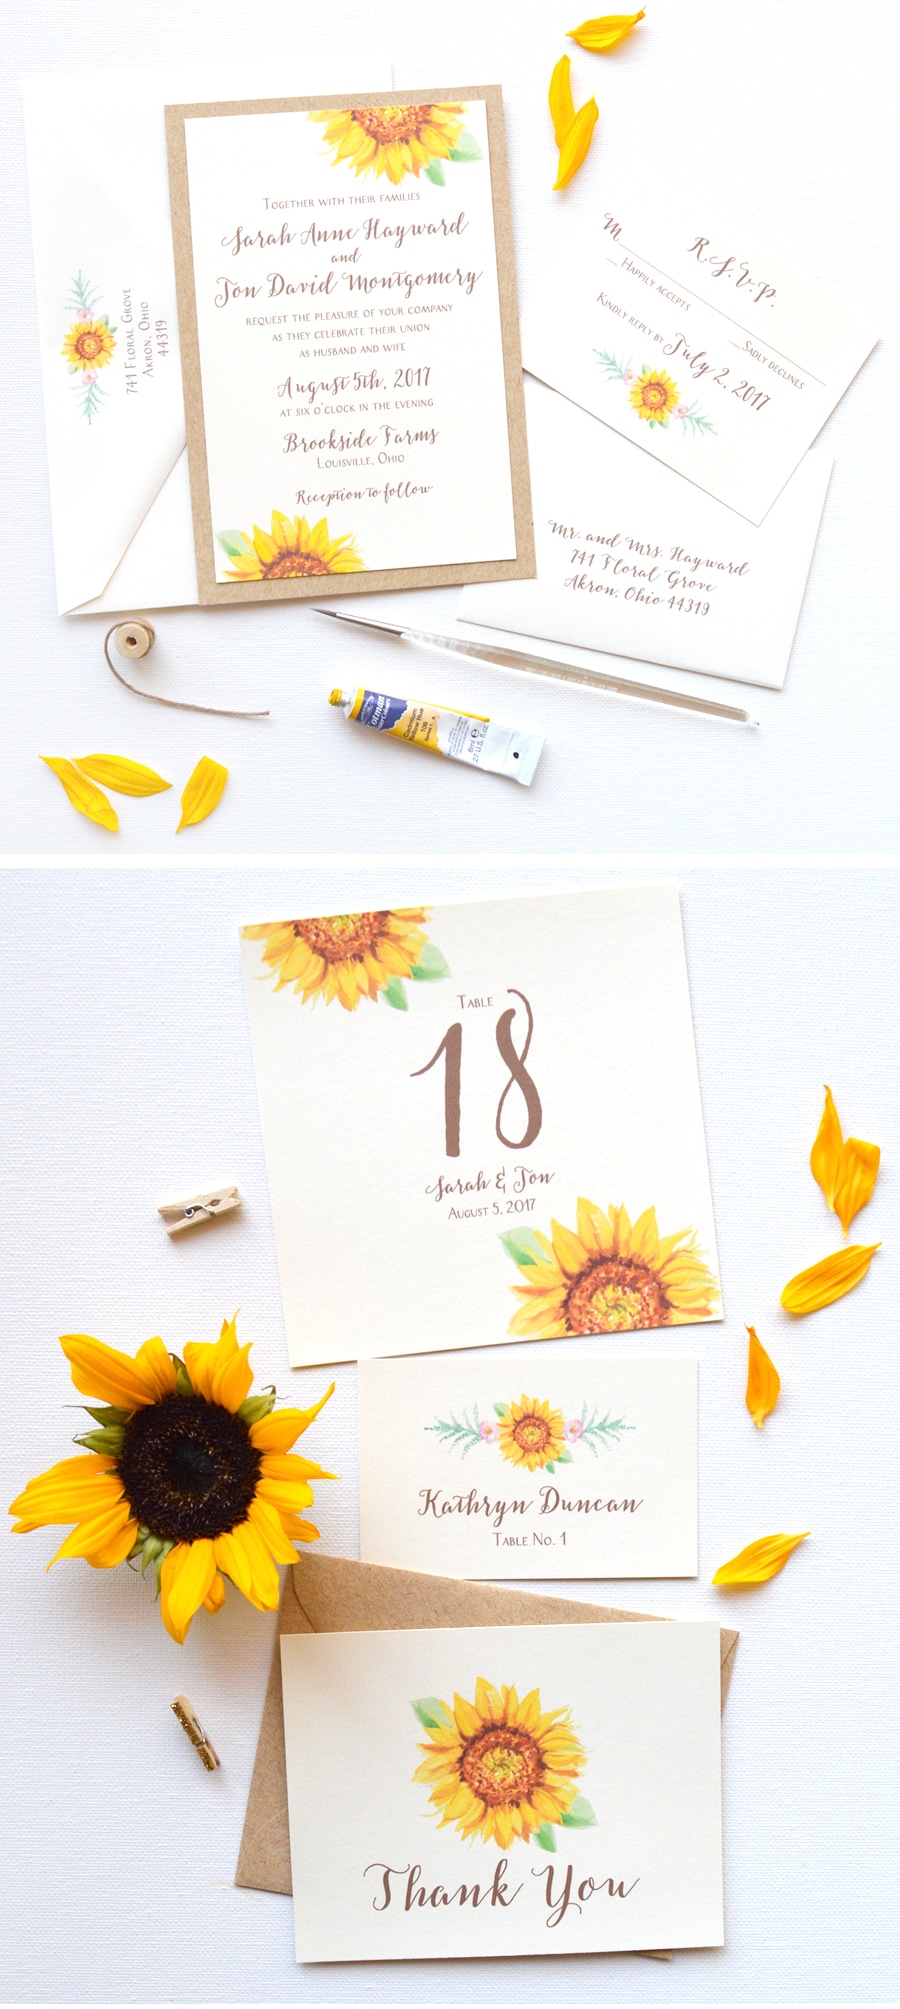 The Sunflower Blooms Wedding Invitation design features country straw card layer, and original watercolor sunflower art. Now available! - www.mospensstudio.com